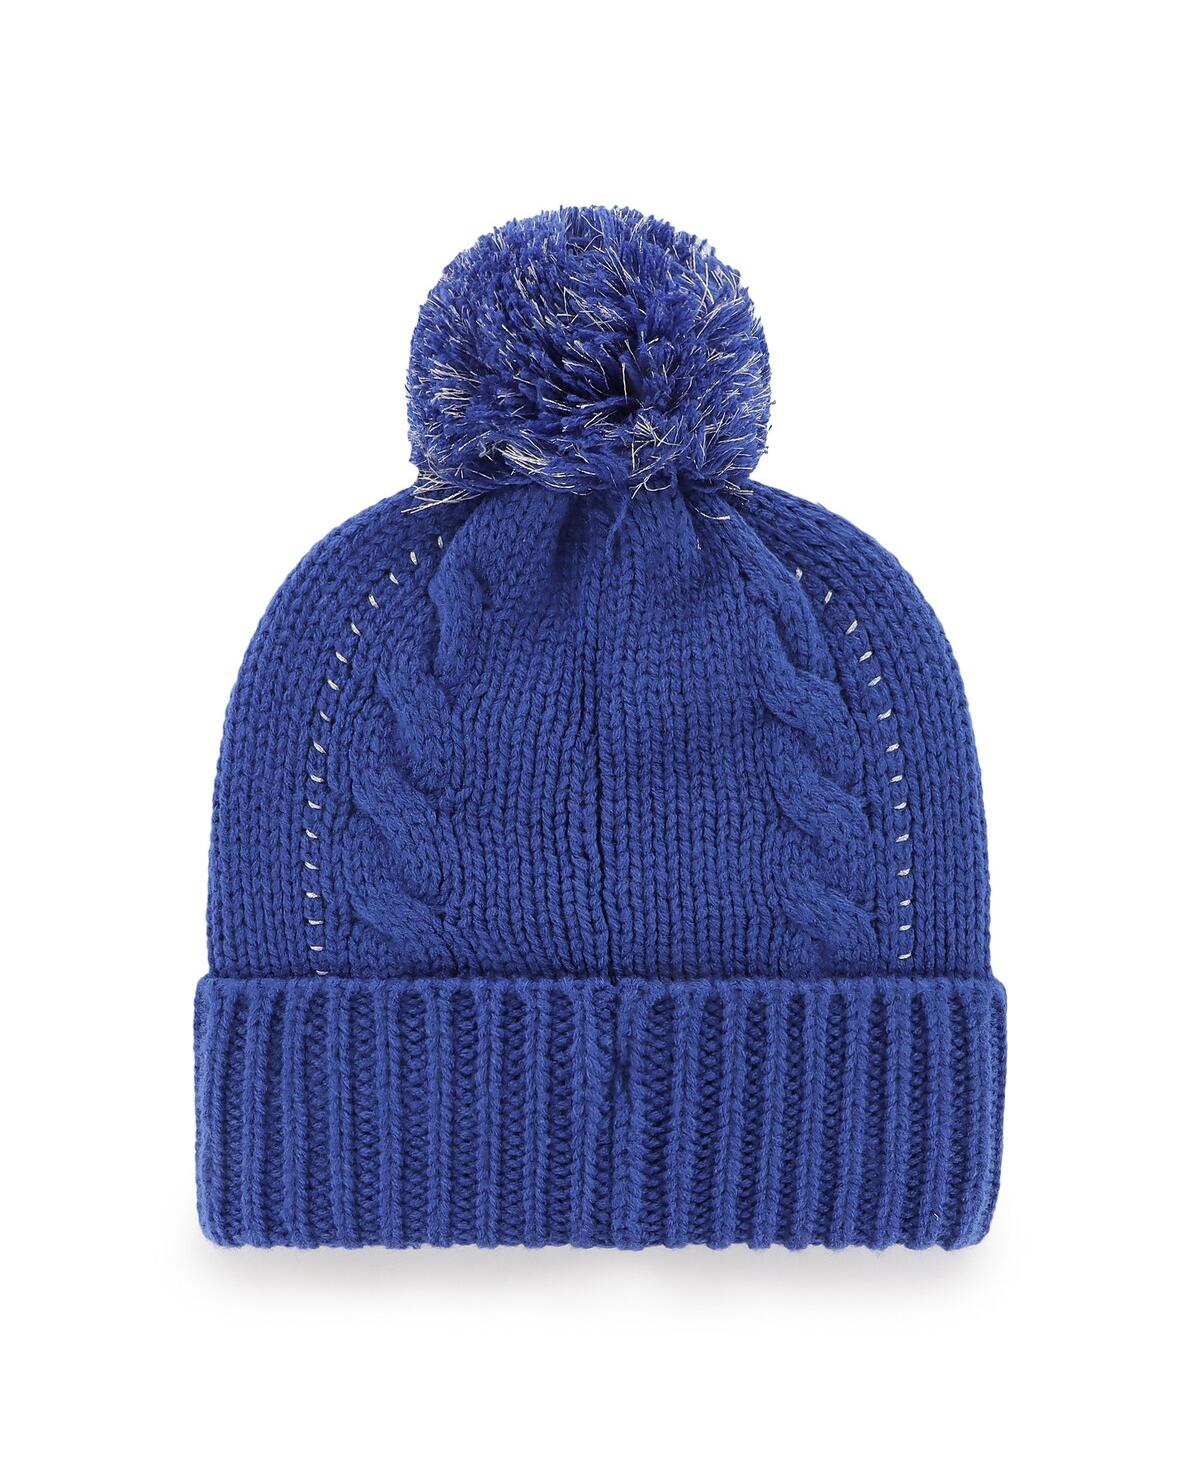 Shop 47 Brand Women's ' Royal New York Giants Bauble Cuffed Knit Hat With Pom